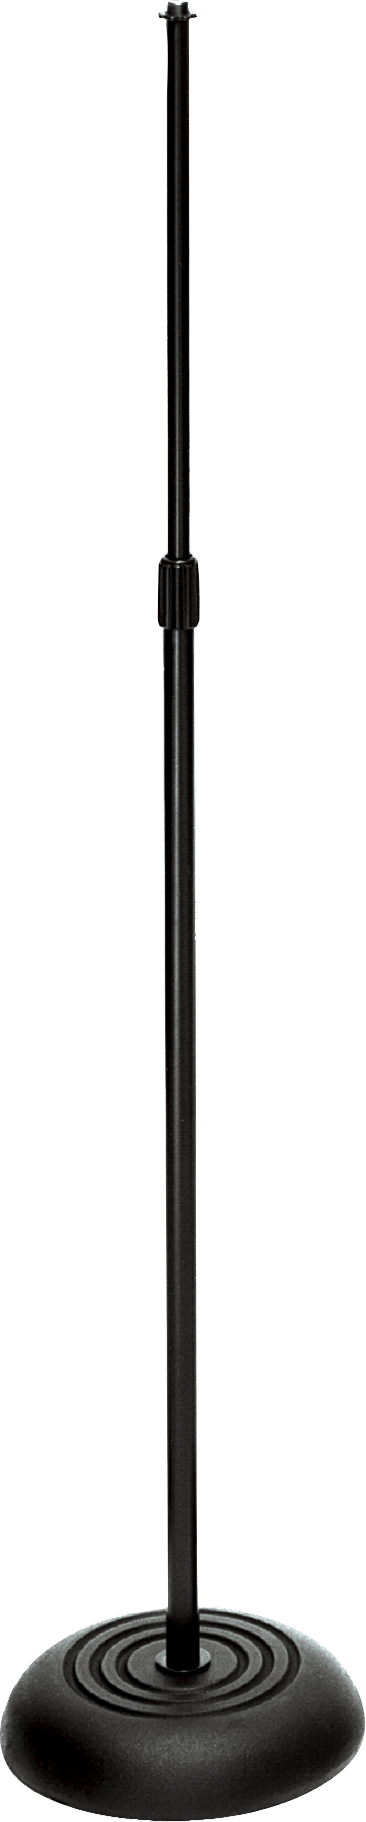 On-Stage On-Stage MS7201 Round-Base Microphone Stand - Chrome